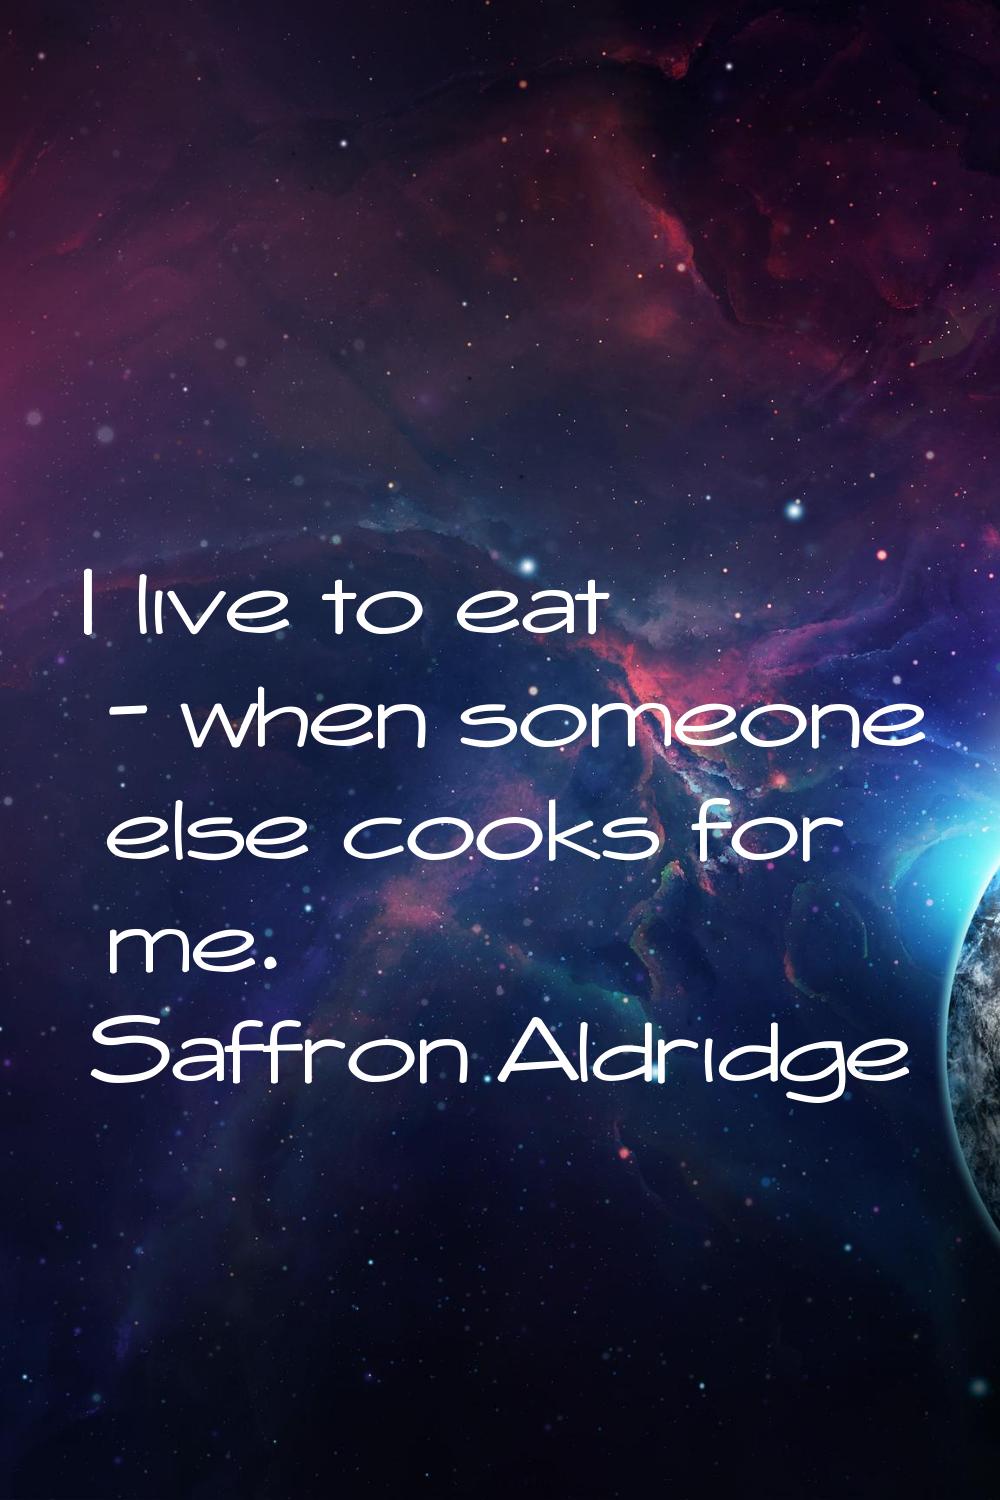 I live to eat - when someone else cooks for me.